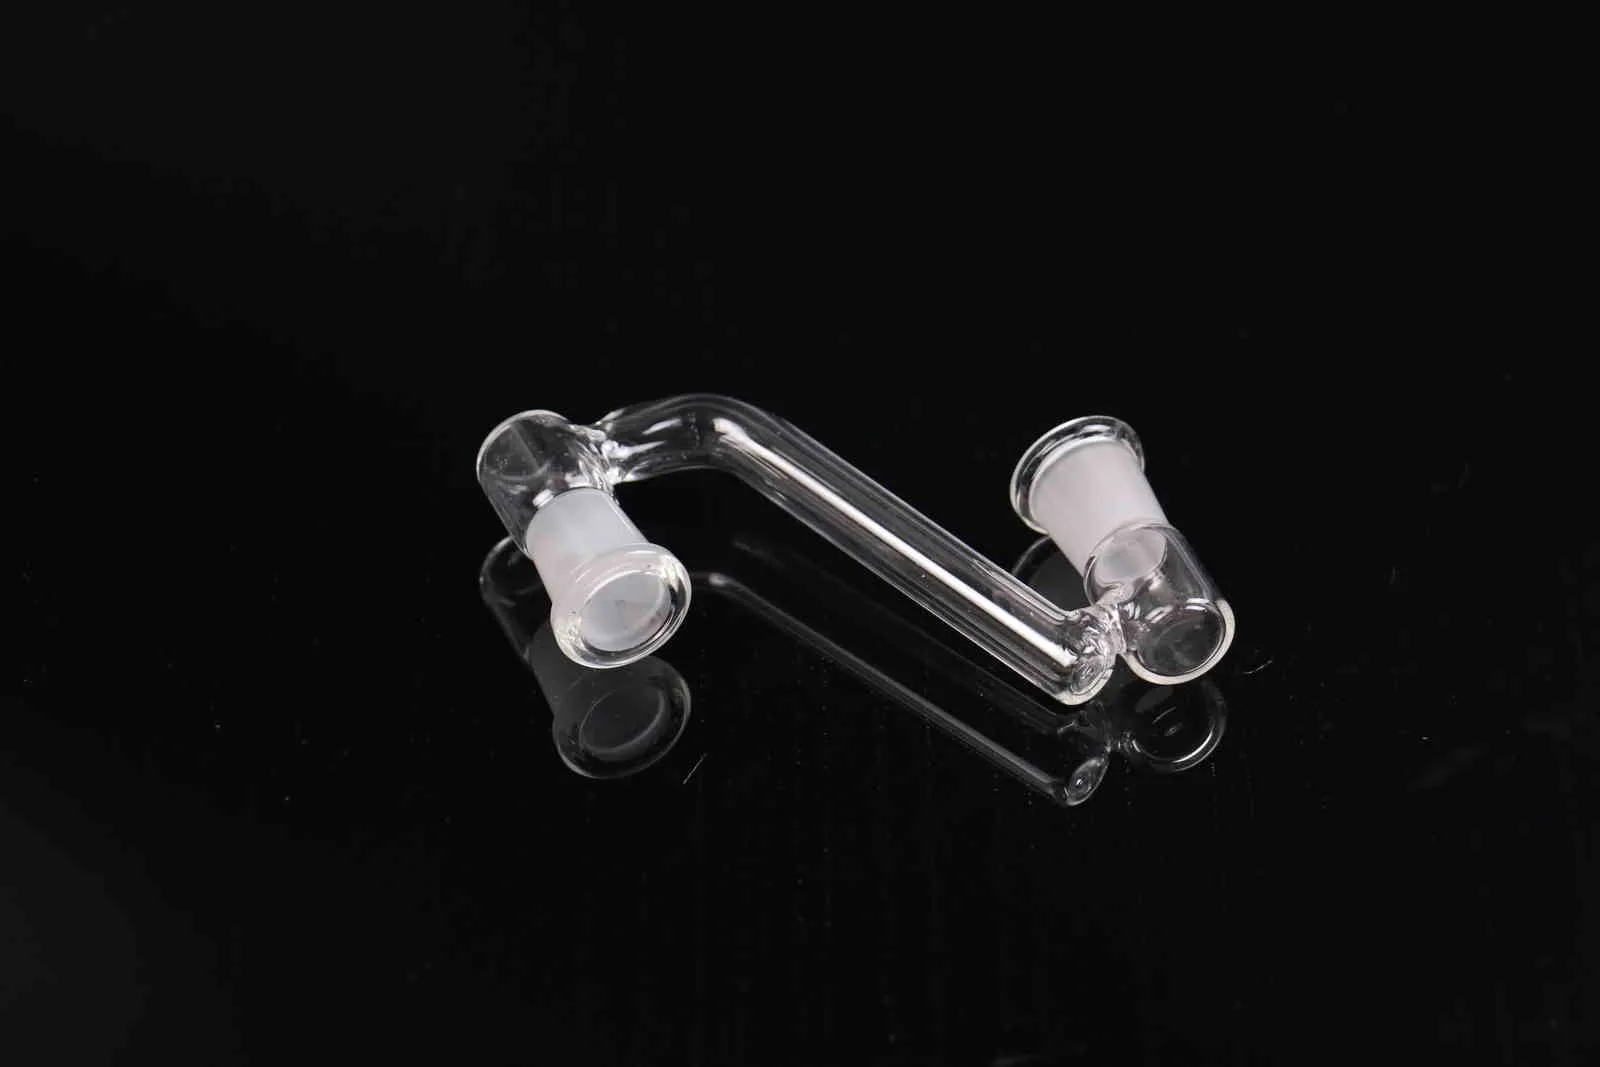 Faihahs Glass Drop Producent Producent Nowy Adapterfor 10 MM / 14.5mm / 18,8 mm Kobiet do Rury Wodnej Oil